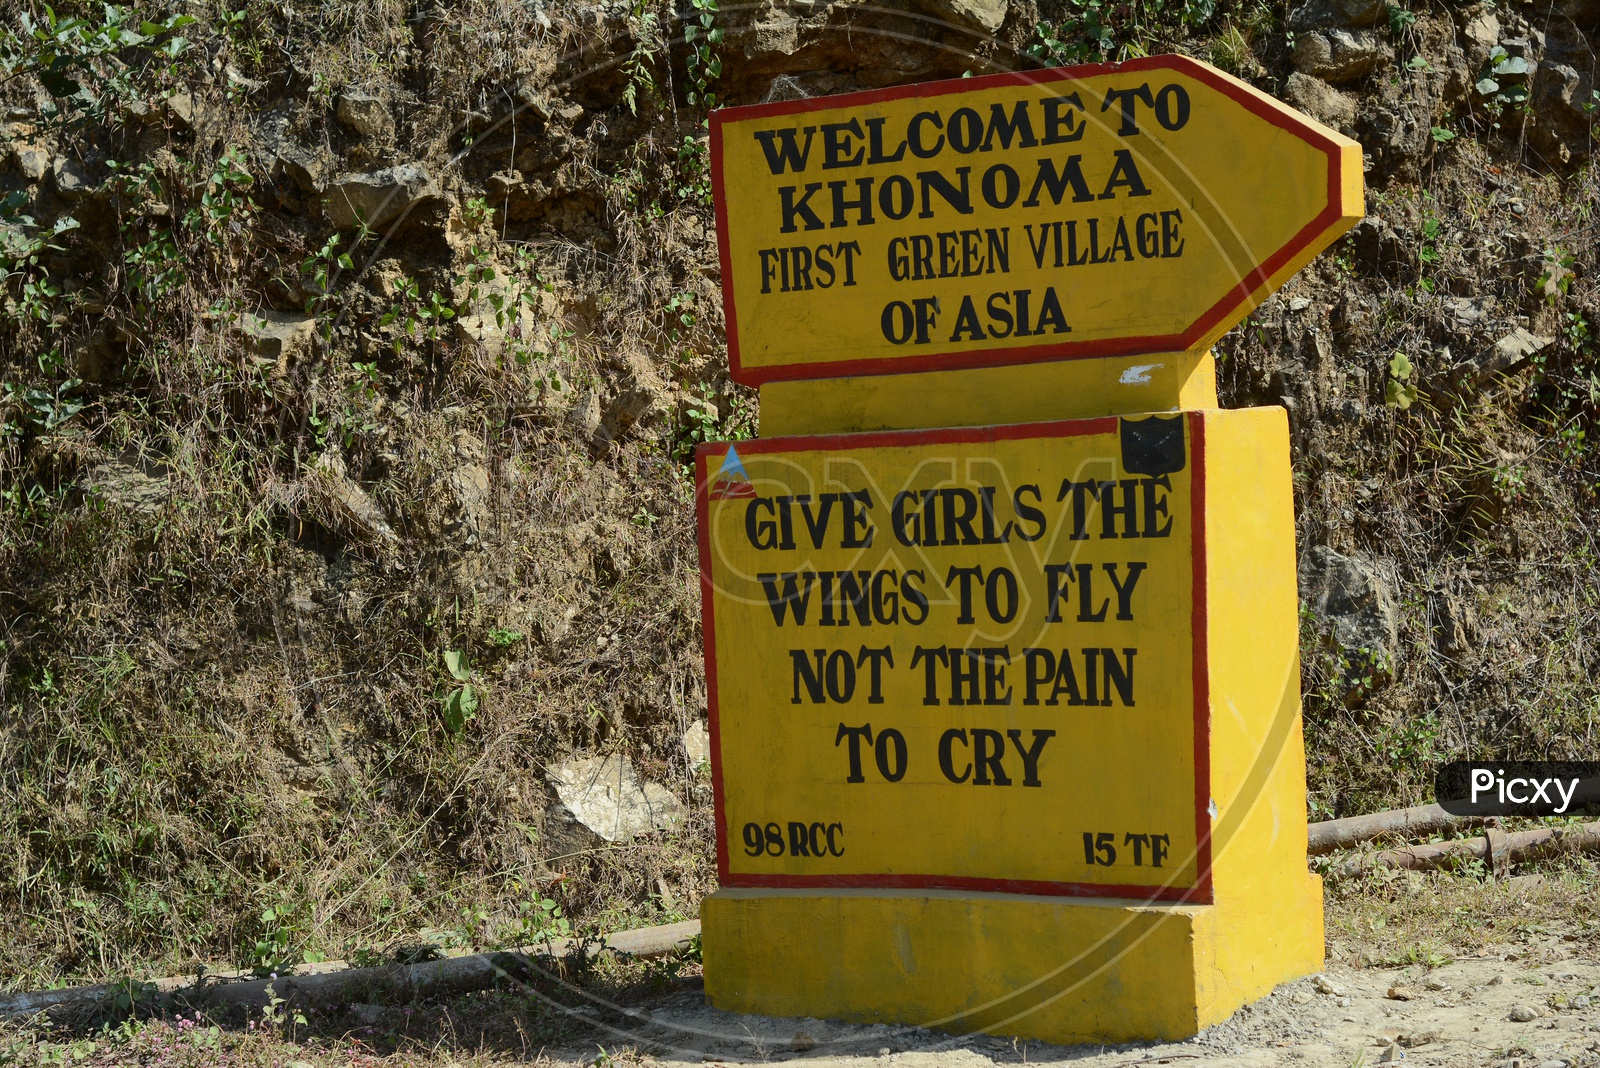 Khonoma First Green Village of Asia